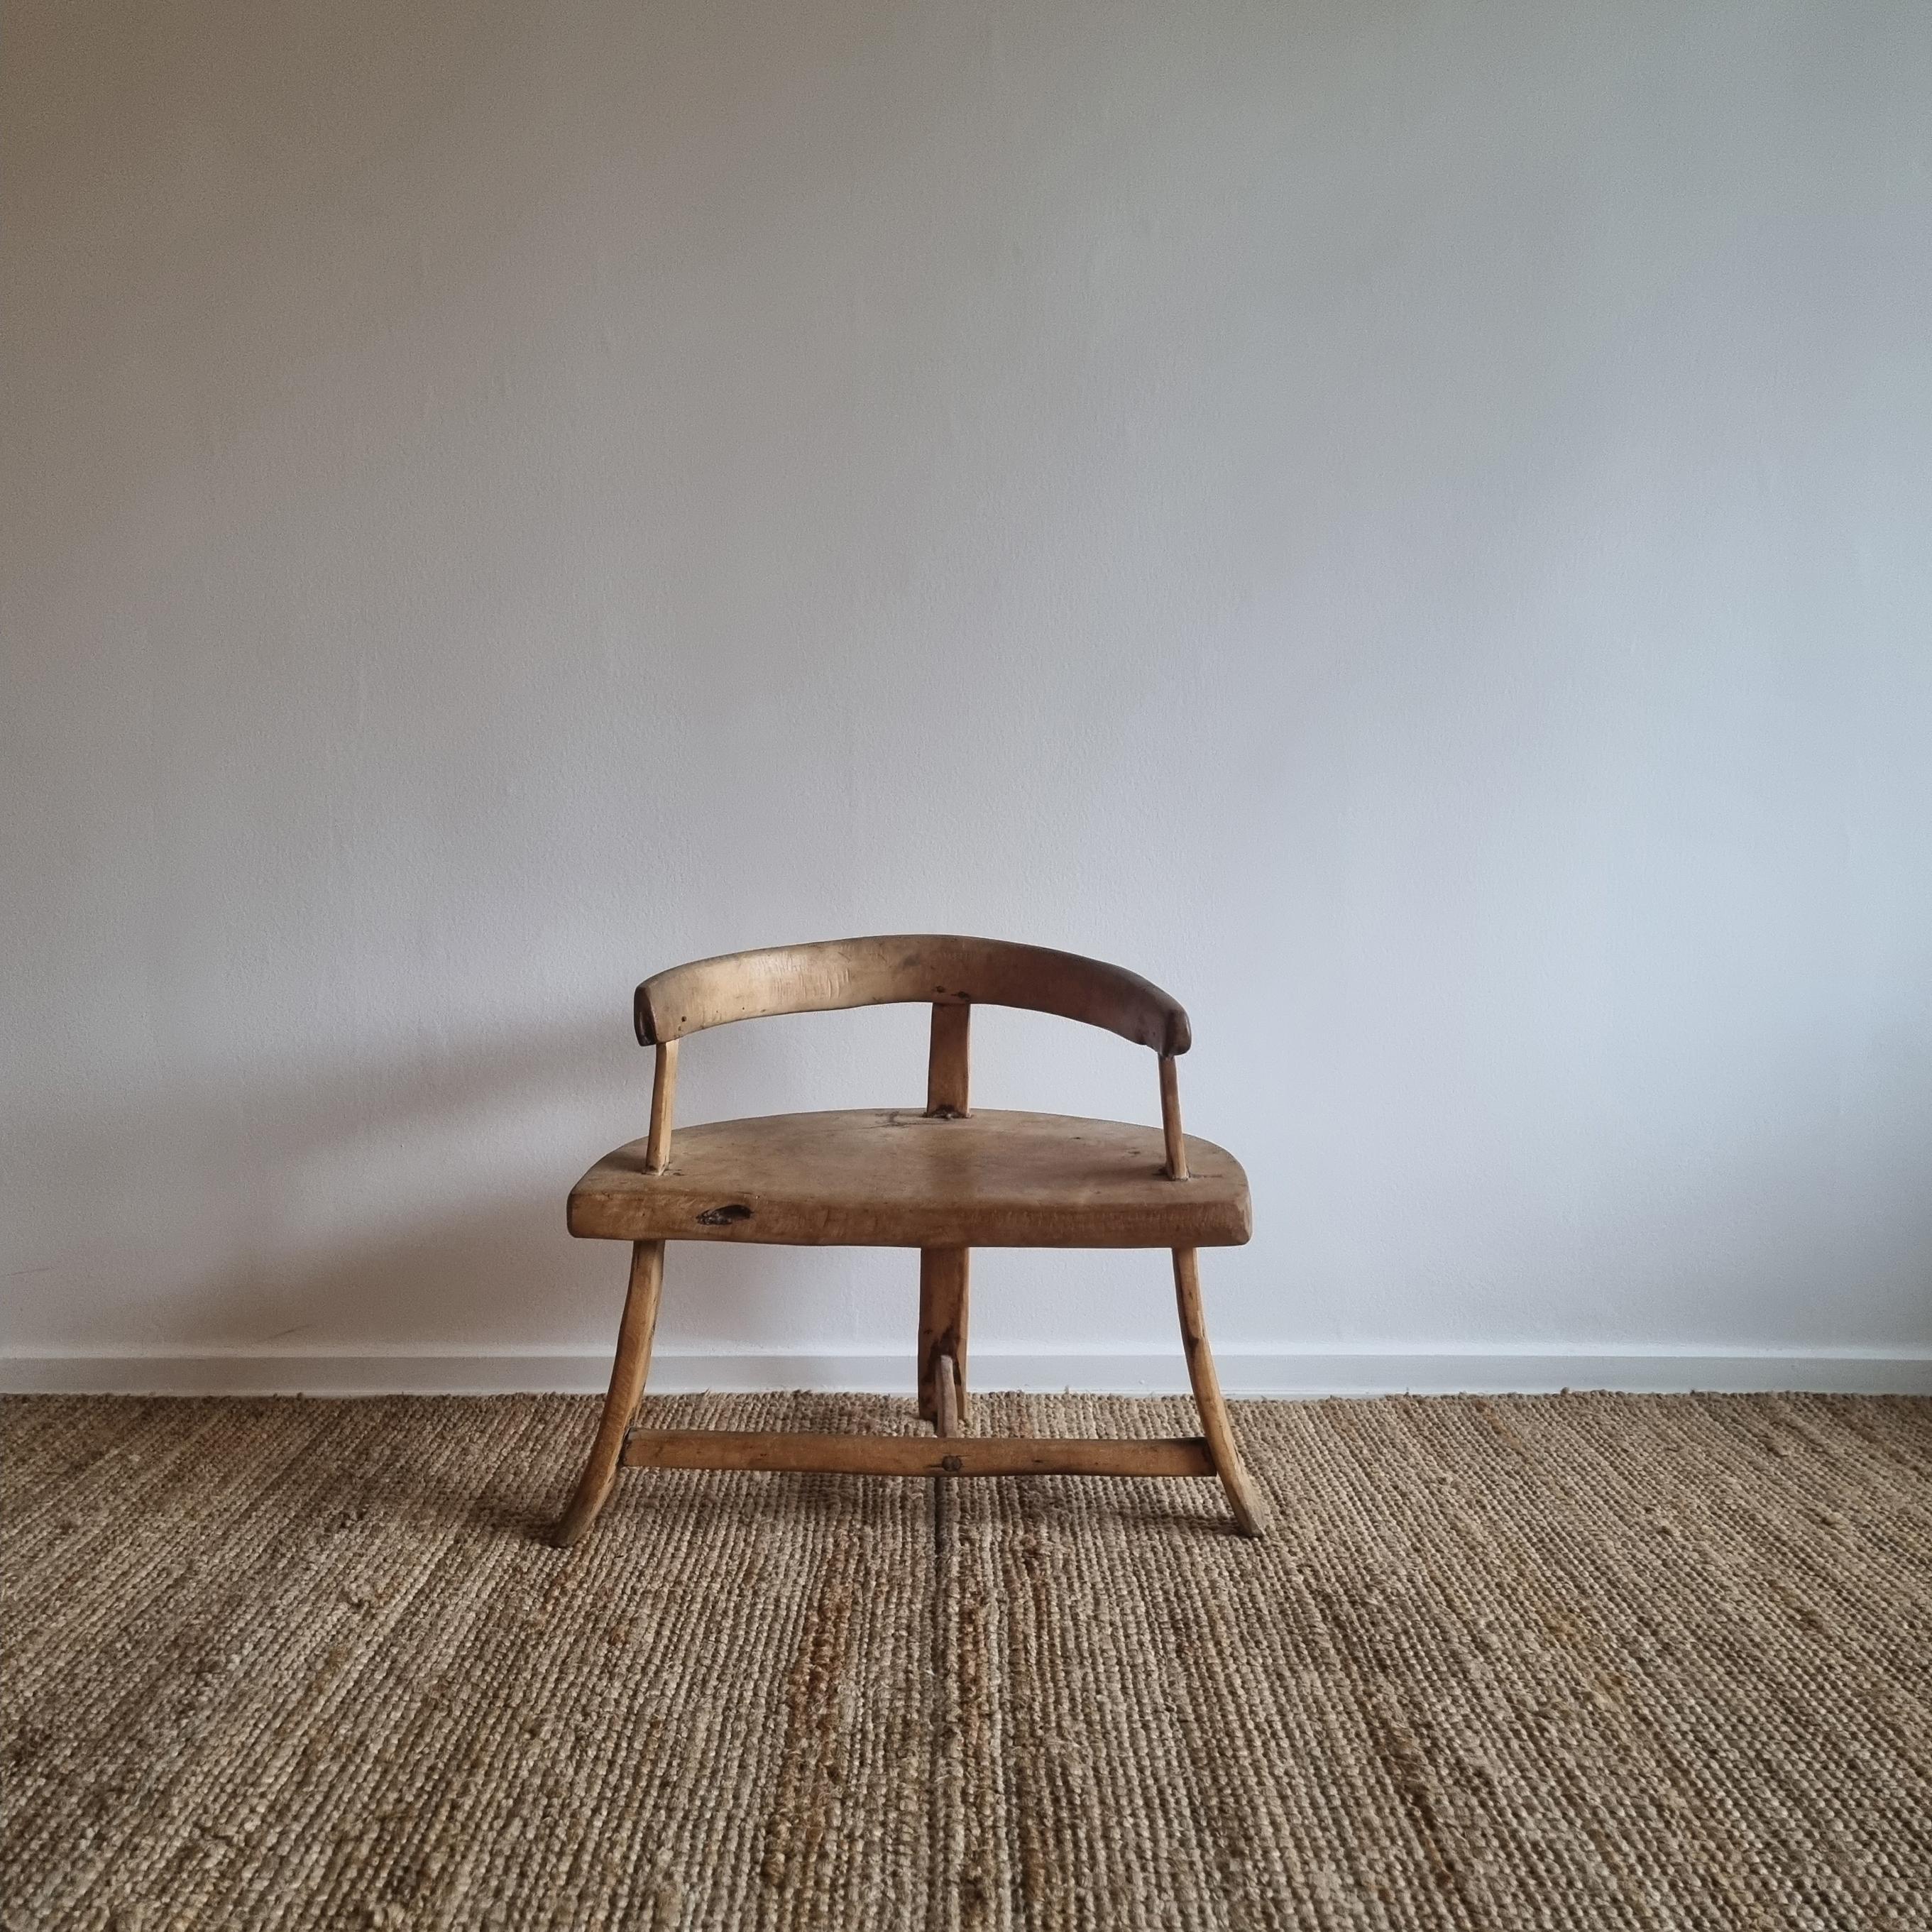 This old beautiful chair is originally from Norway where it was crafted some time in the beginning of 1800 century.
It has only wooden plugs, and the seat is made out of a thick slab of pine as the rest of the stool.